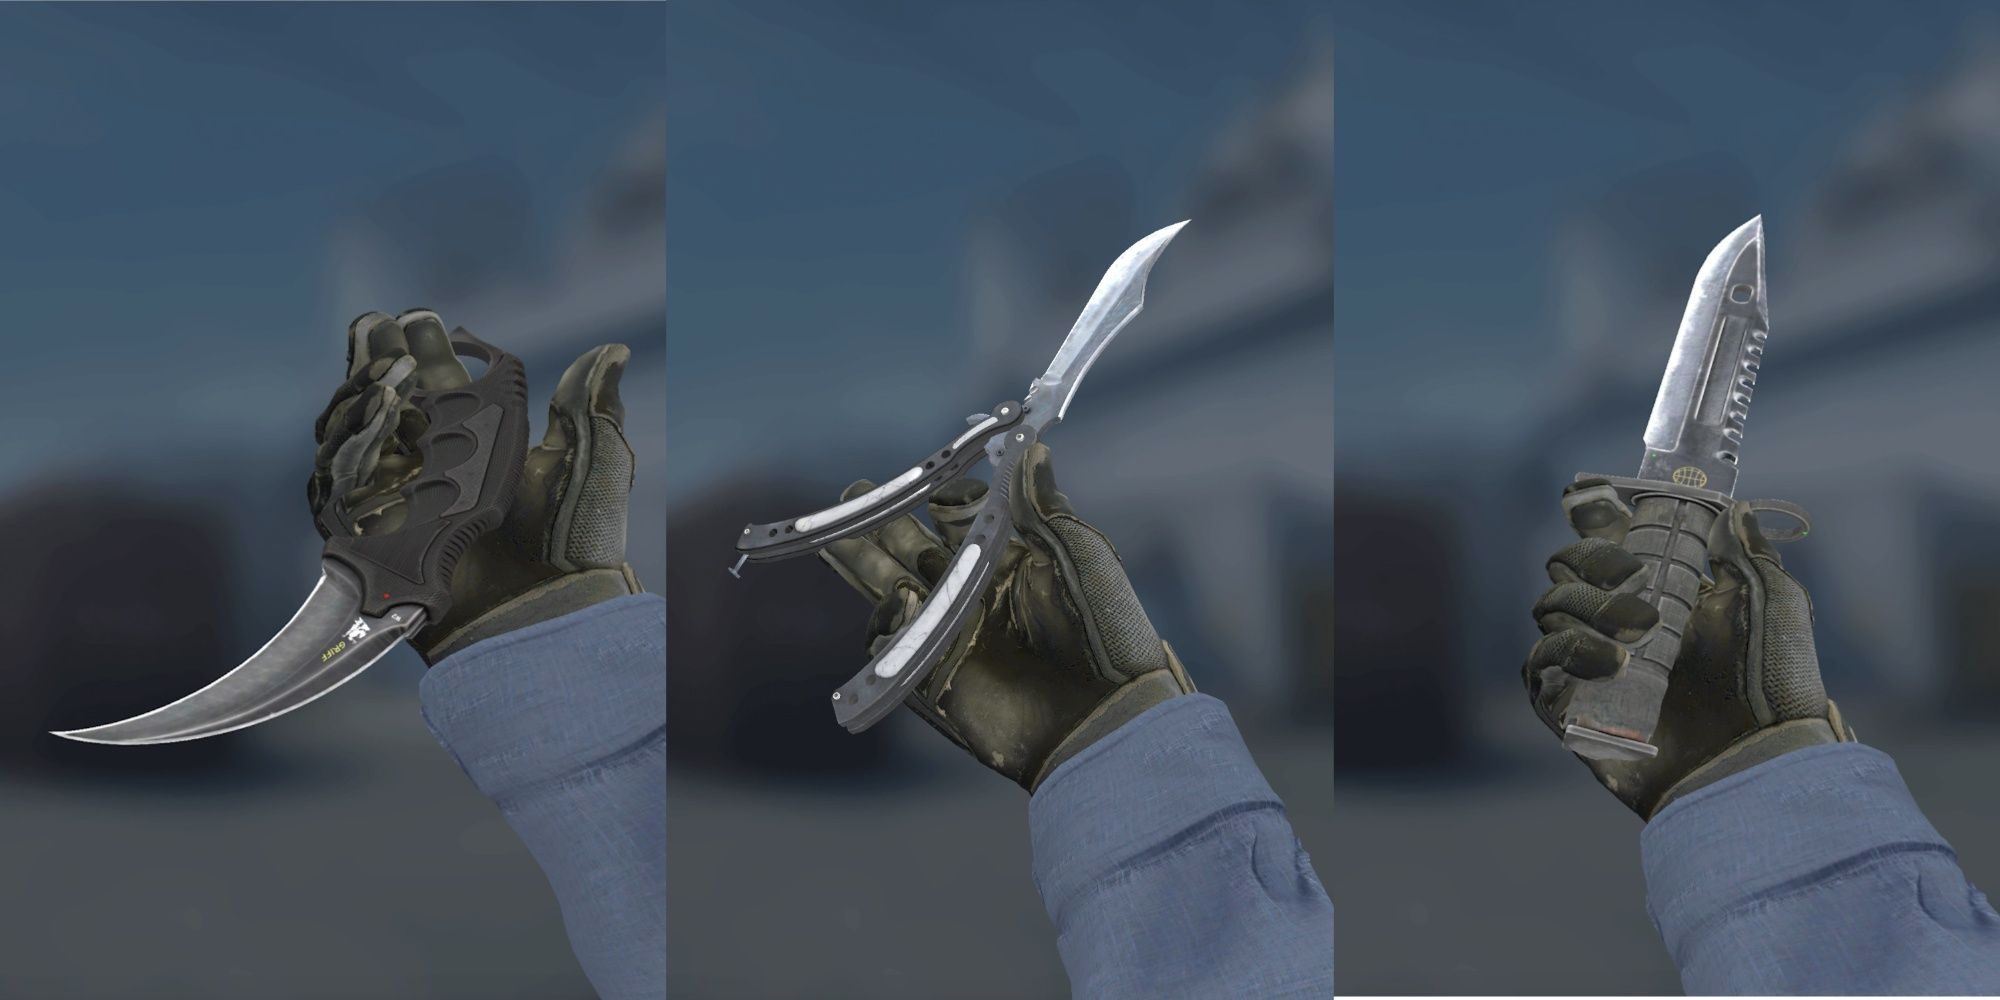 CSGO - 10 Best Knives v2 featuring the Karambit, Butterfly Knife, and M9 Bayonet